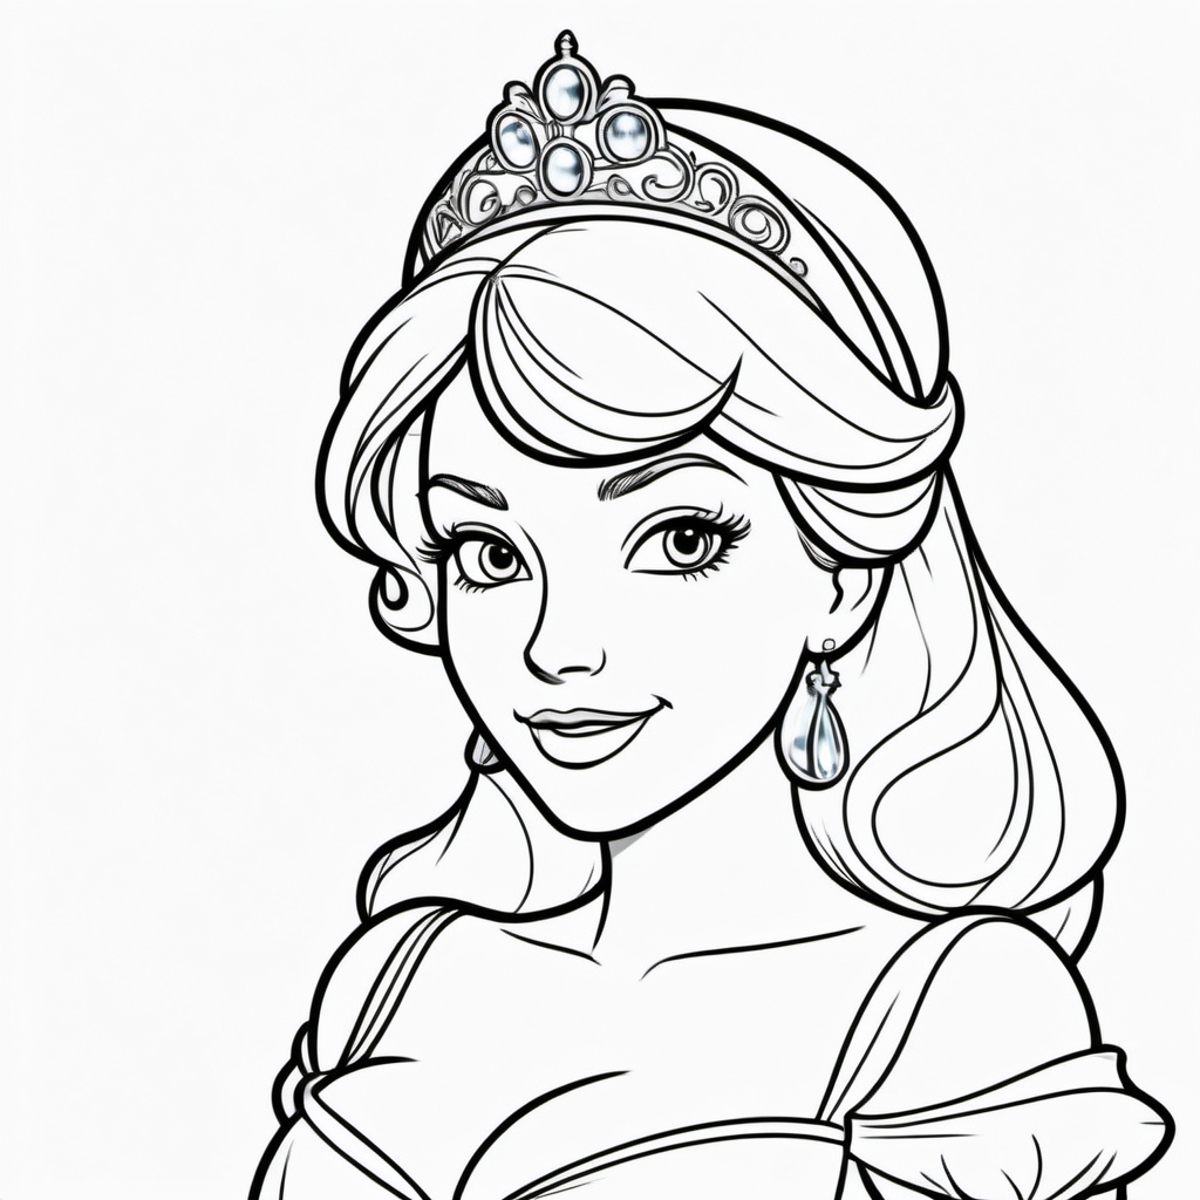 Coloring book - LineArt image by Scofano